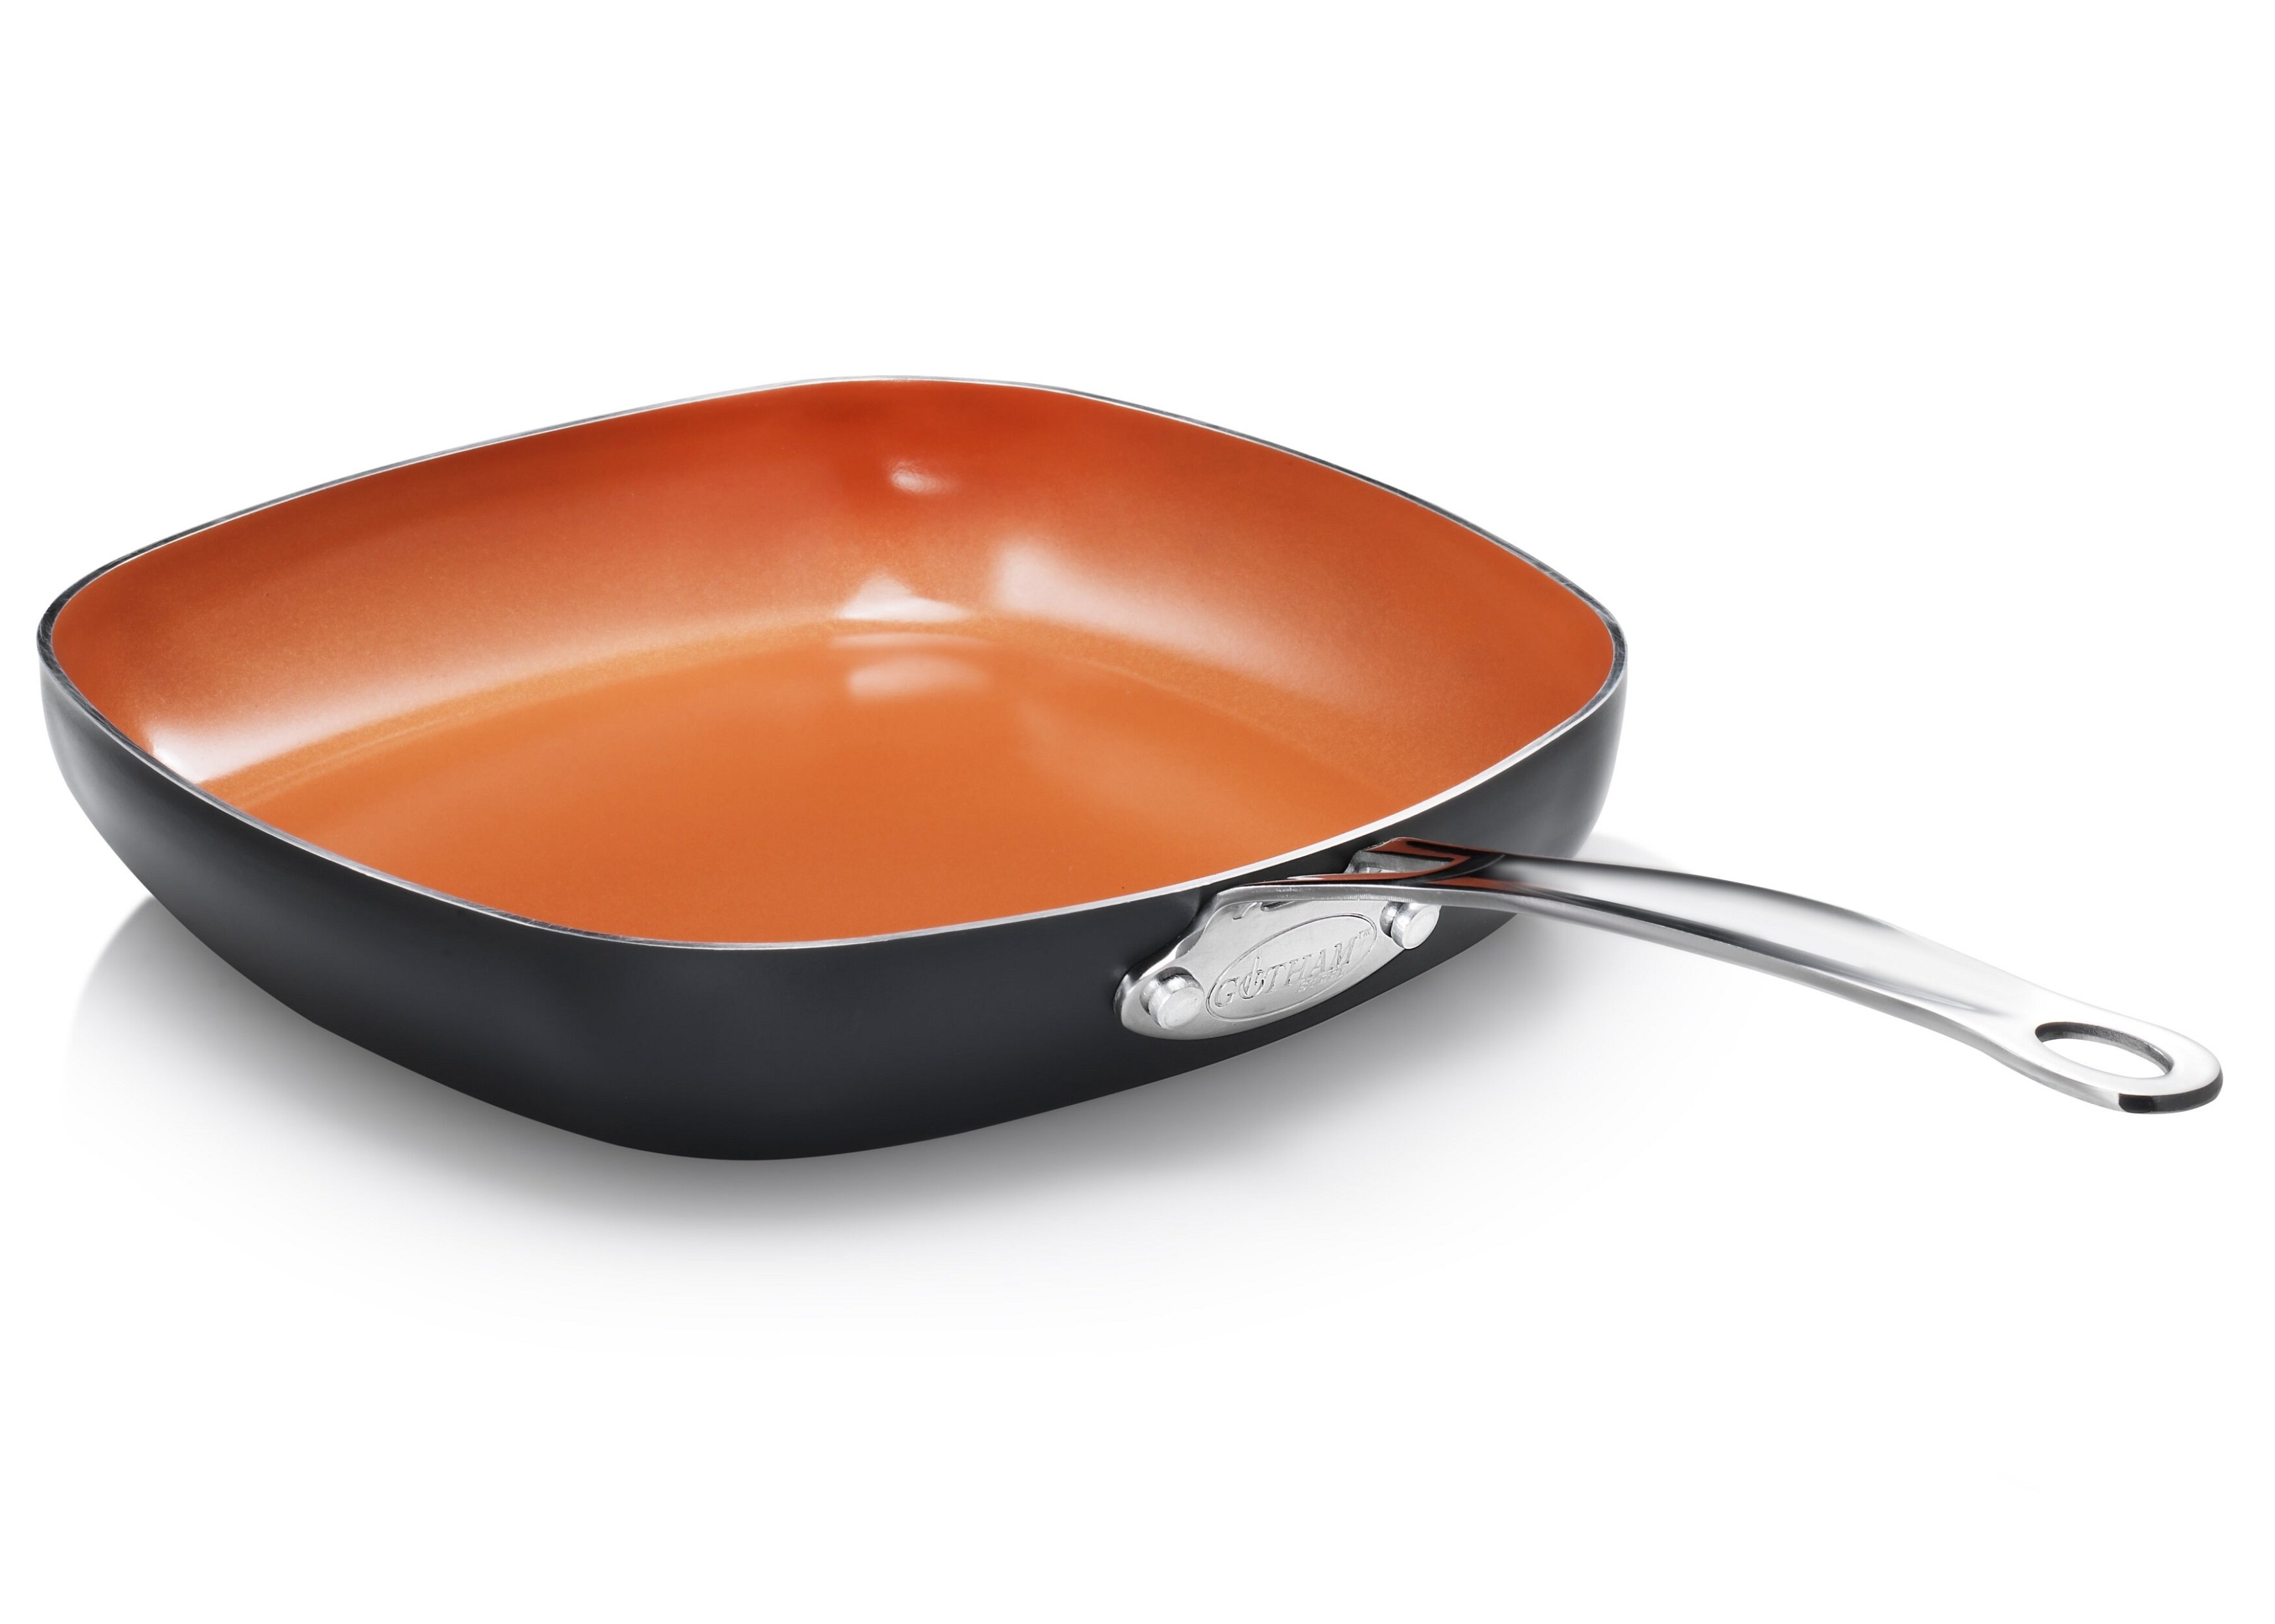 Gotham Steel Deep Square Fry Pan with Stay Cool Handle, Oven & Dishwasher Safe Size: 11 1735